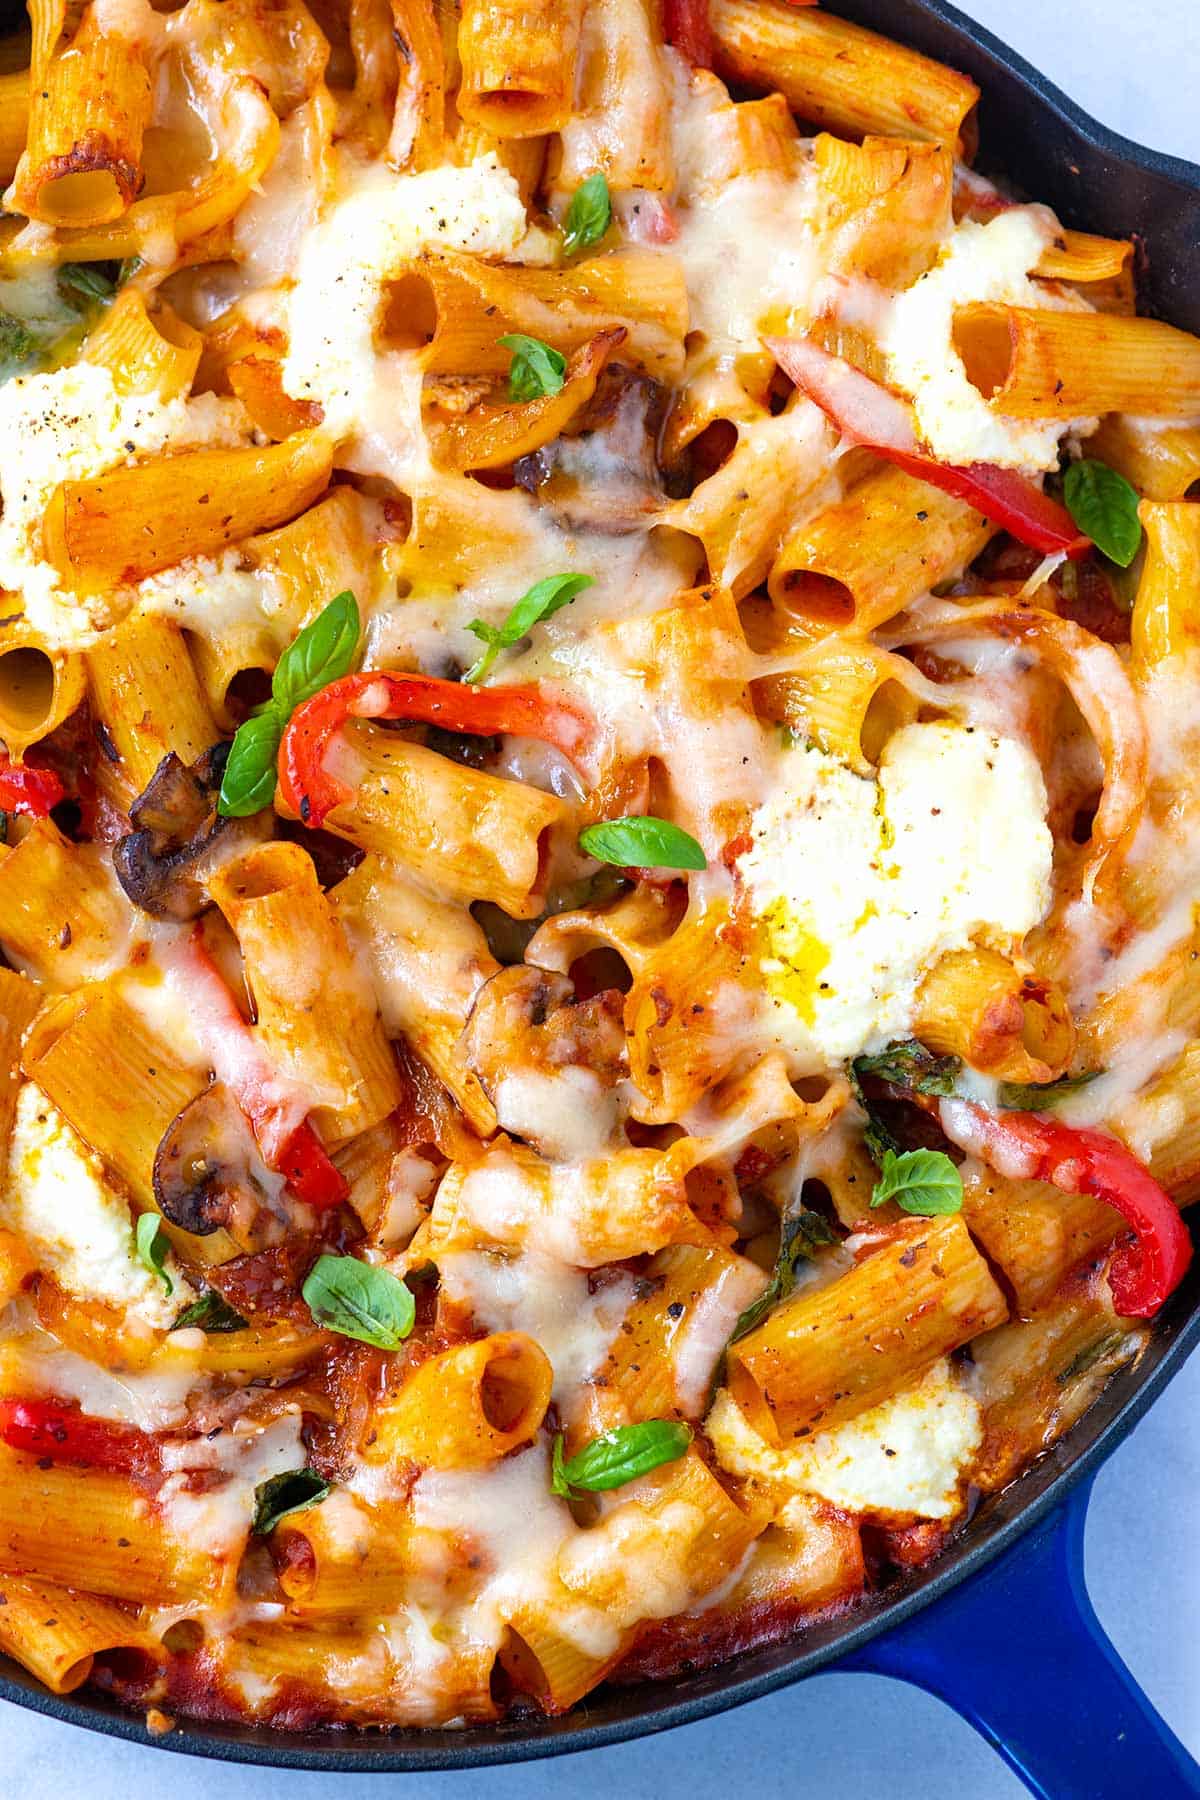 Baked Pasta with Vegetables